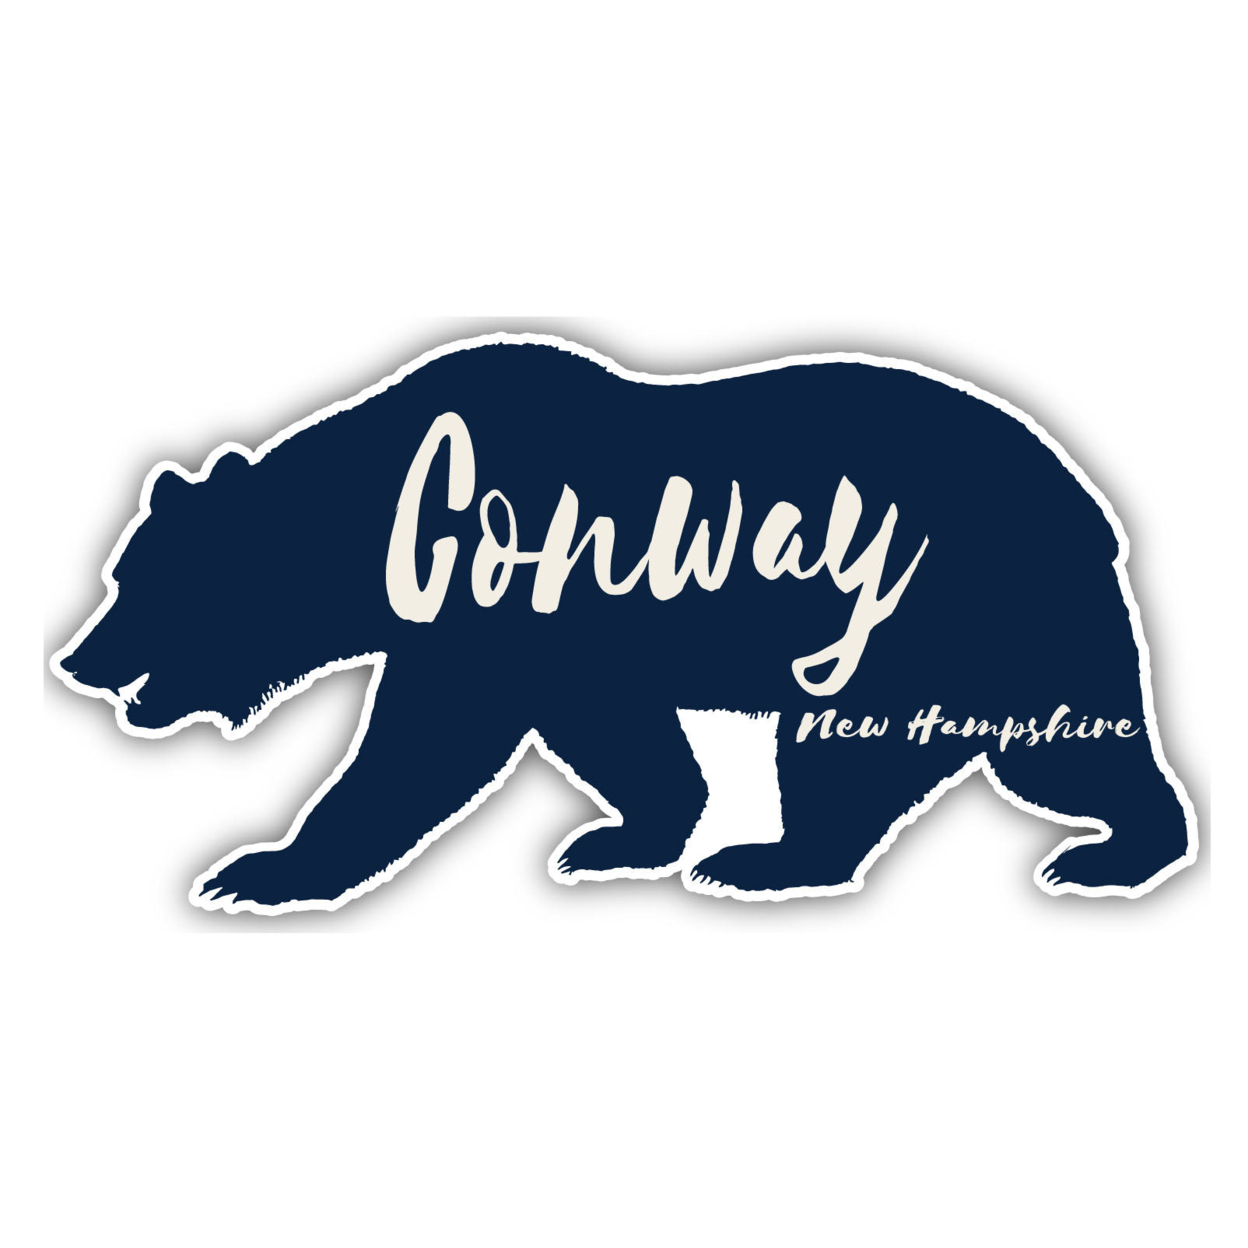 Conway New Hampshire Souvenir Decorative Stickers (Choose Theme And Size) - Single Unit, 6-Inch, Bear